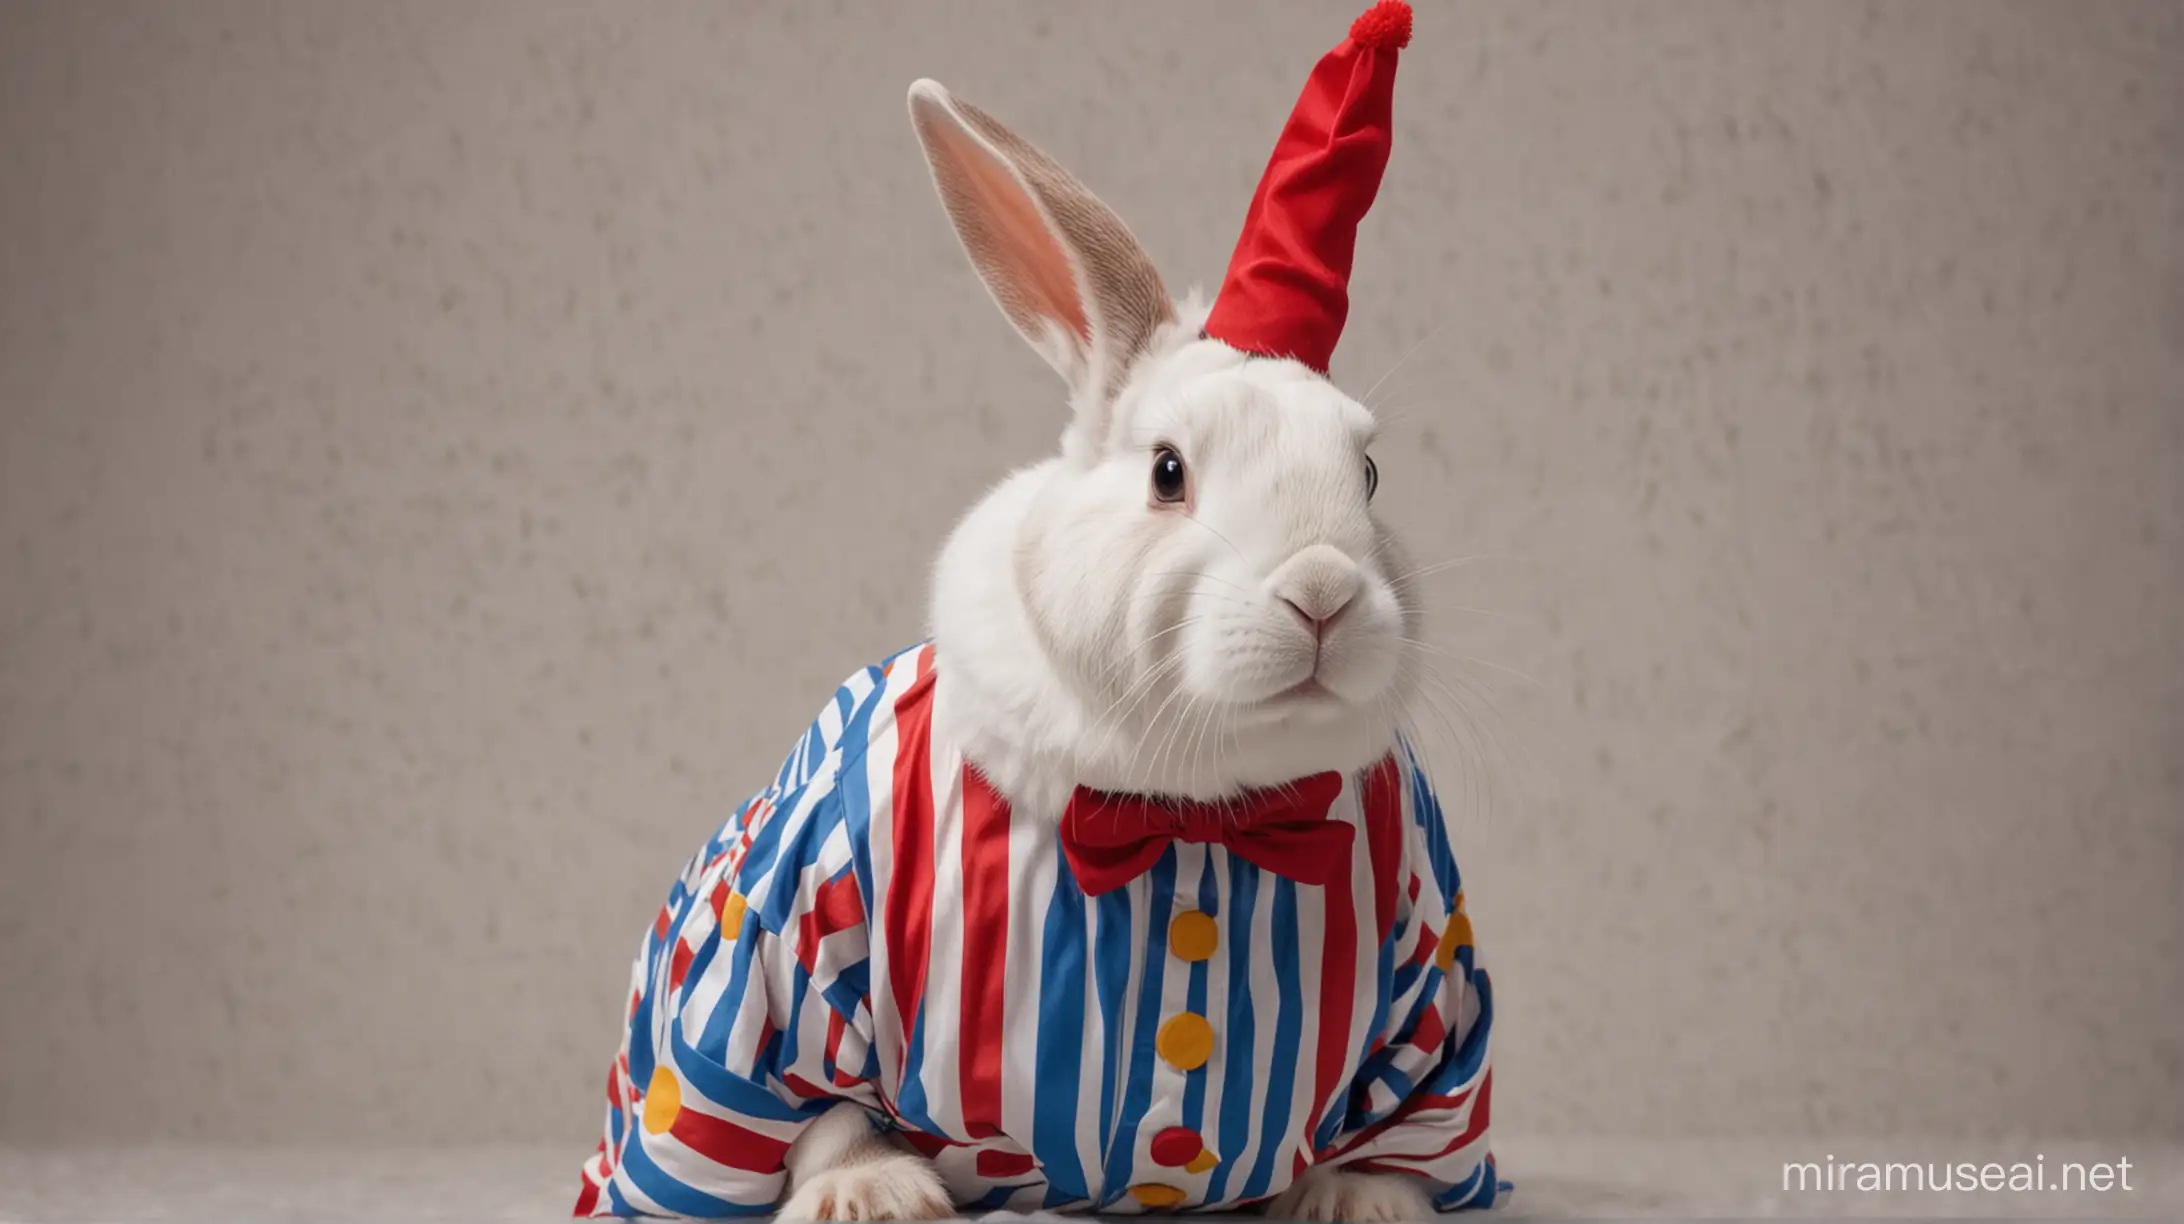 Adorable Rabbit Wearing a Colorful Clown Costume